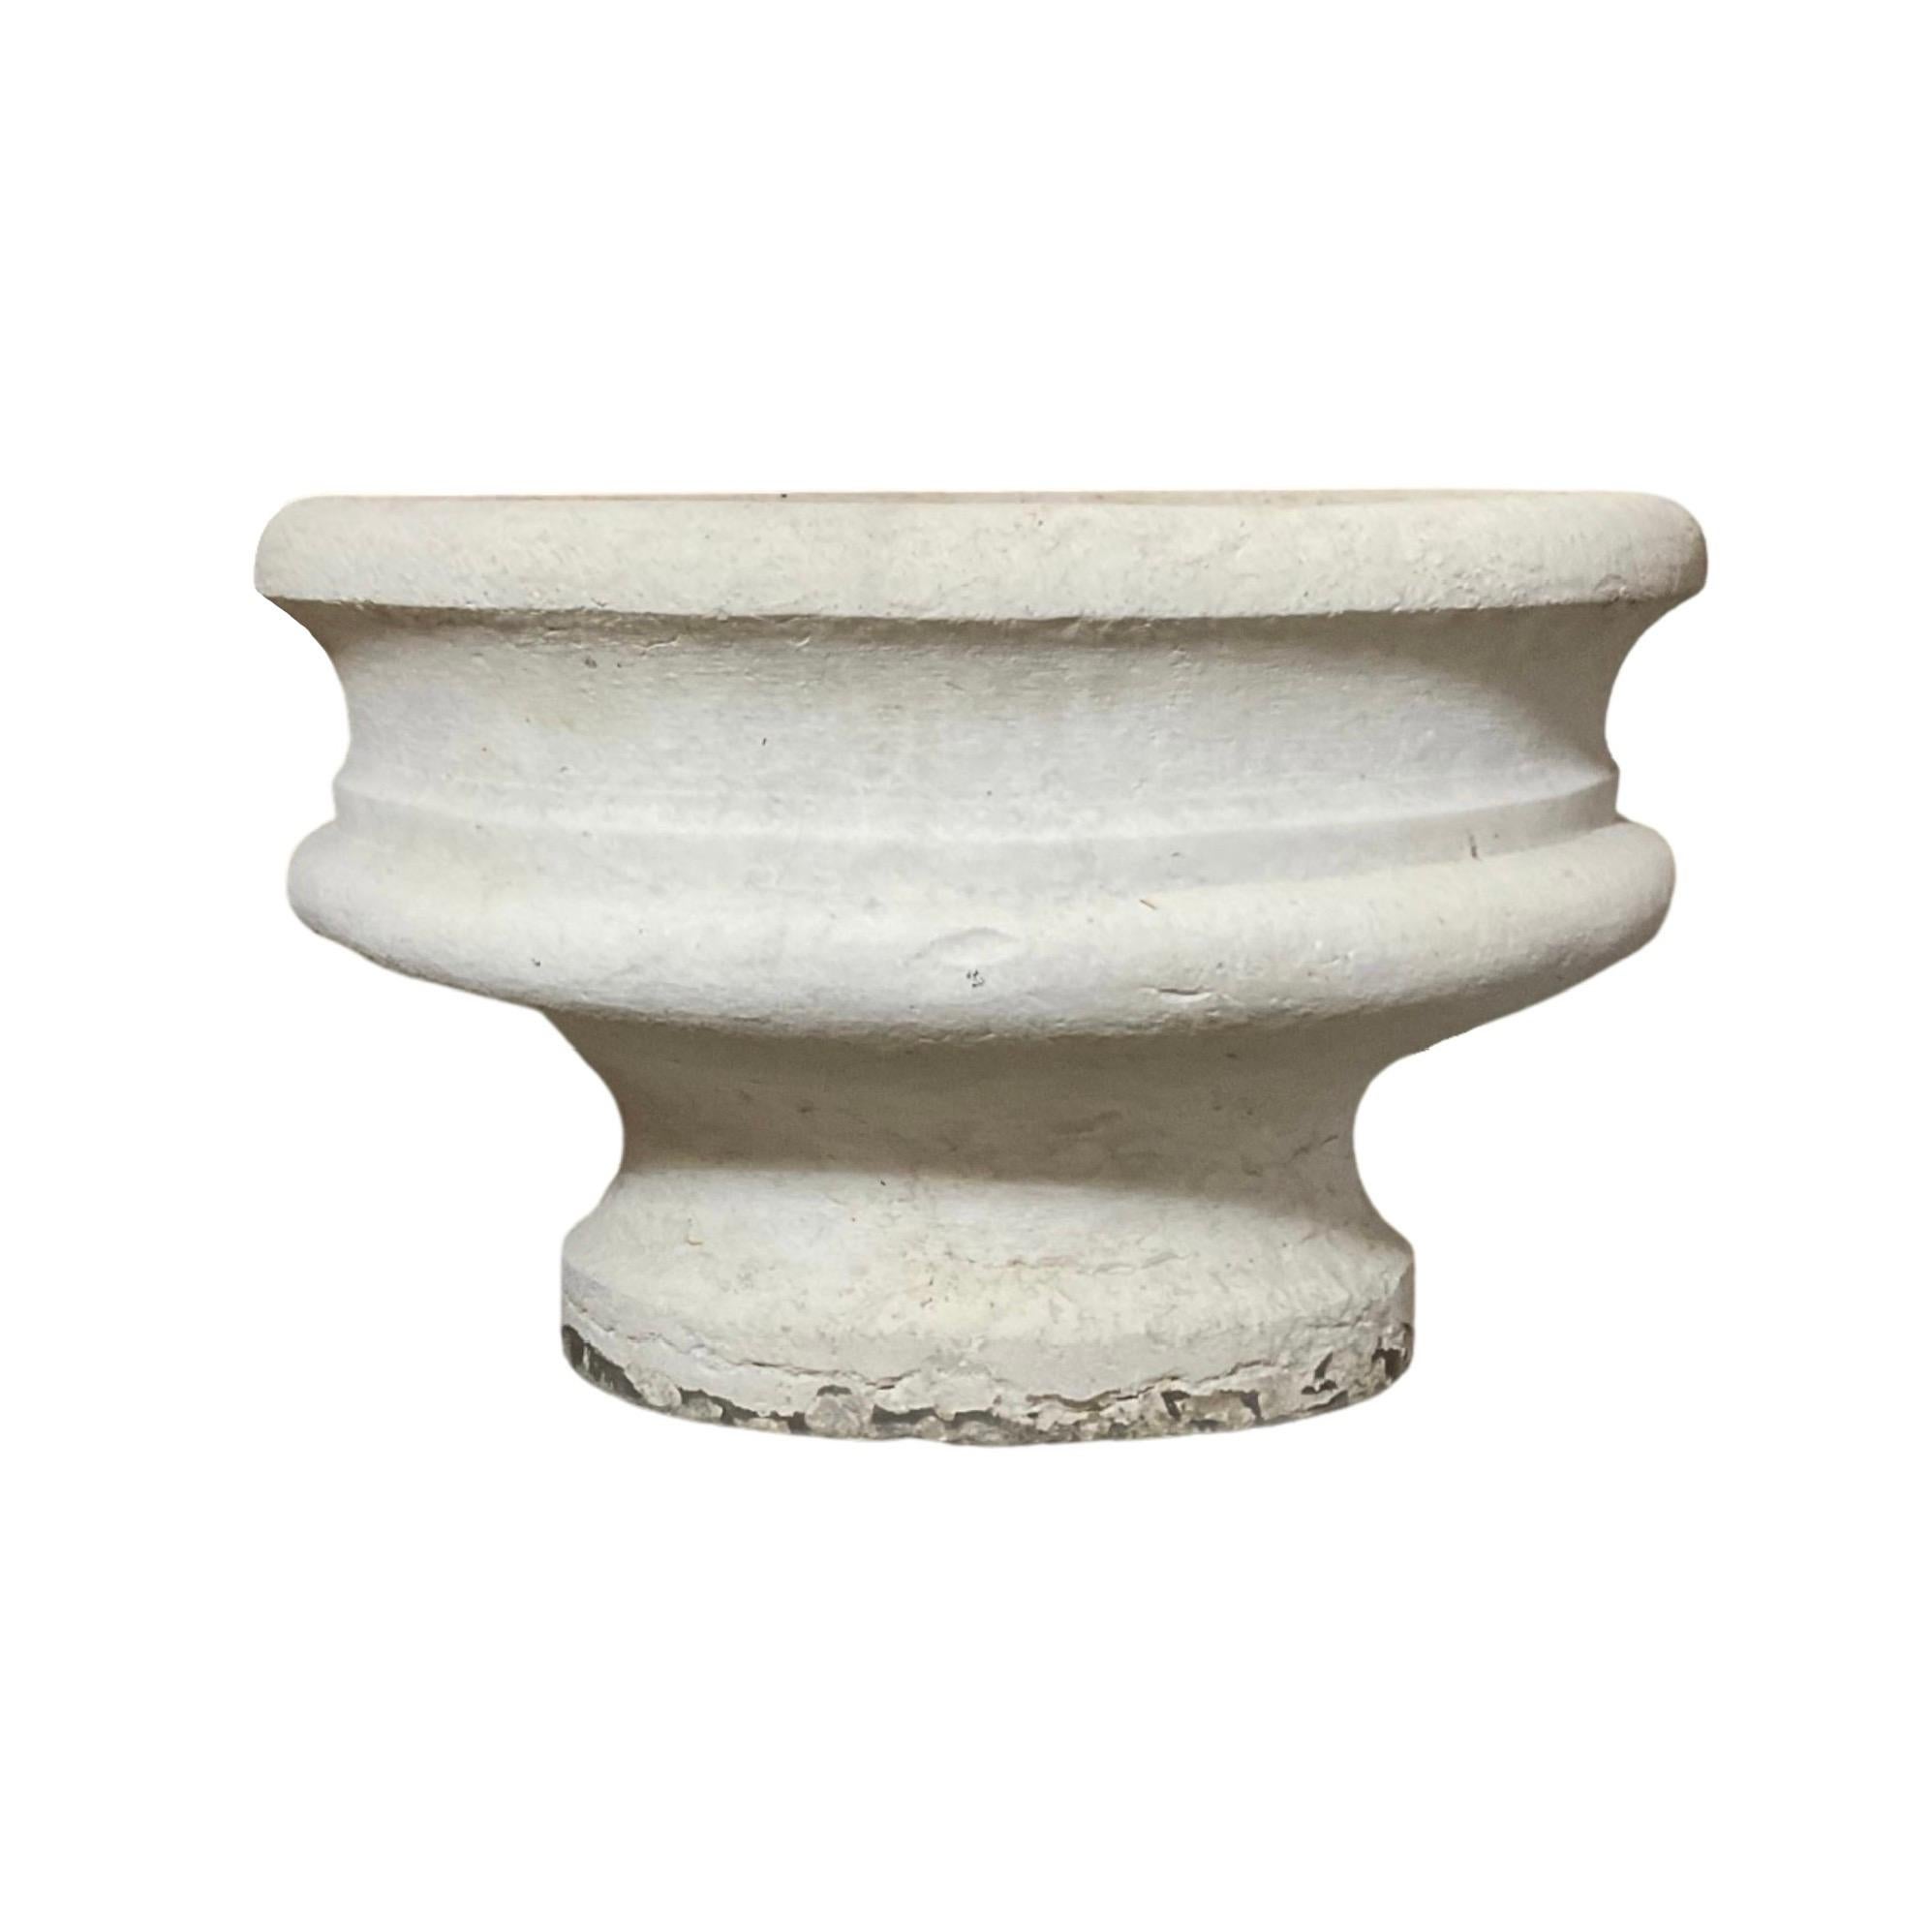 This French Limestone Planter is a timeless classic. Manufactured in 1880 and imported from France, this planter is made of durable limestone in an oval shape style. An ideal addition to your garden or outdoor space, it provides a reliable structure